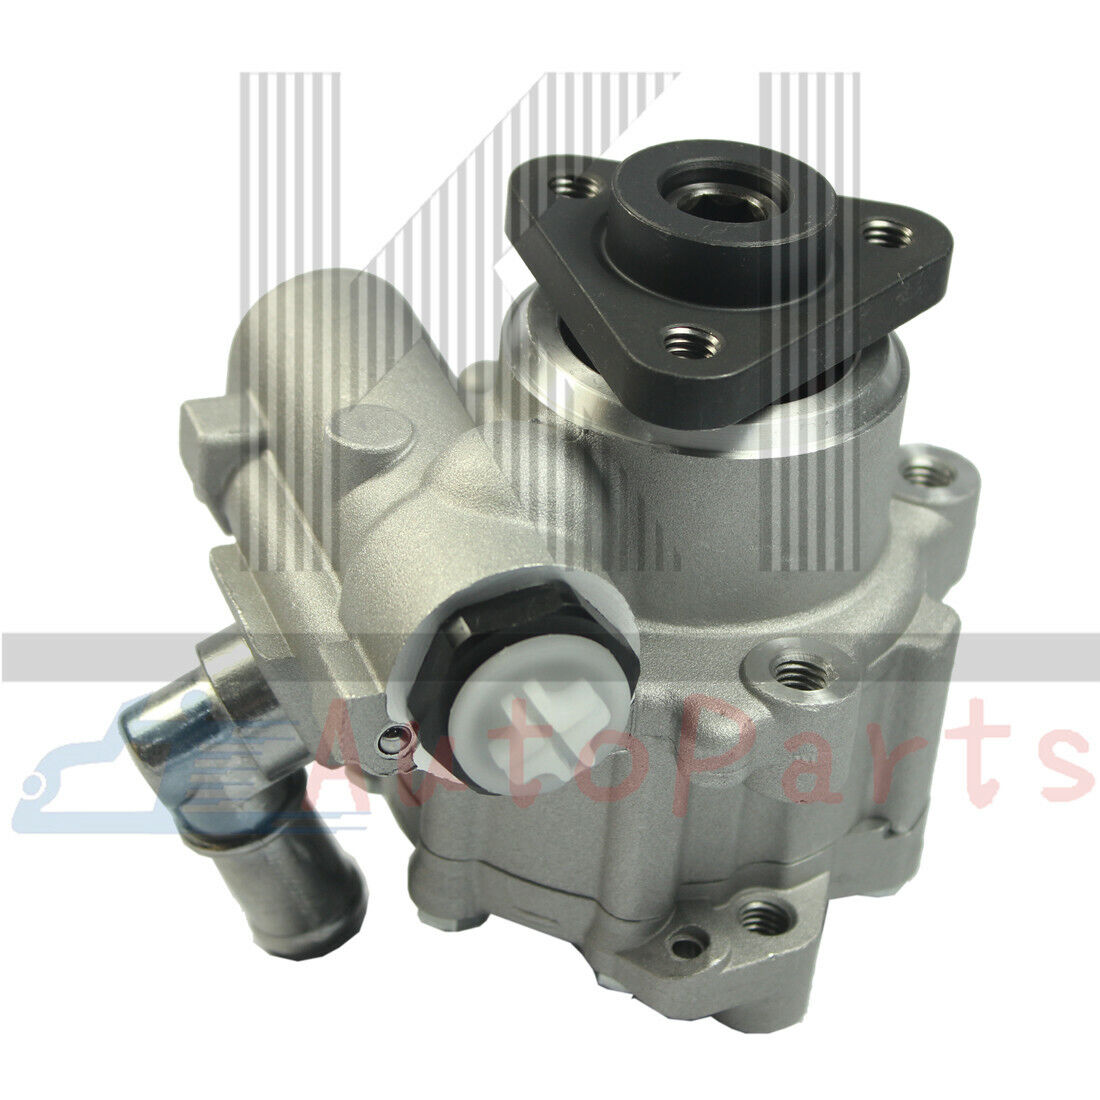 Power Steering Pump 32416757840 For 2001-2007 BMW E53 X5 3.0L 32416757914